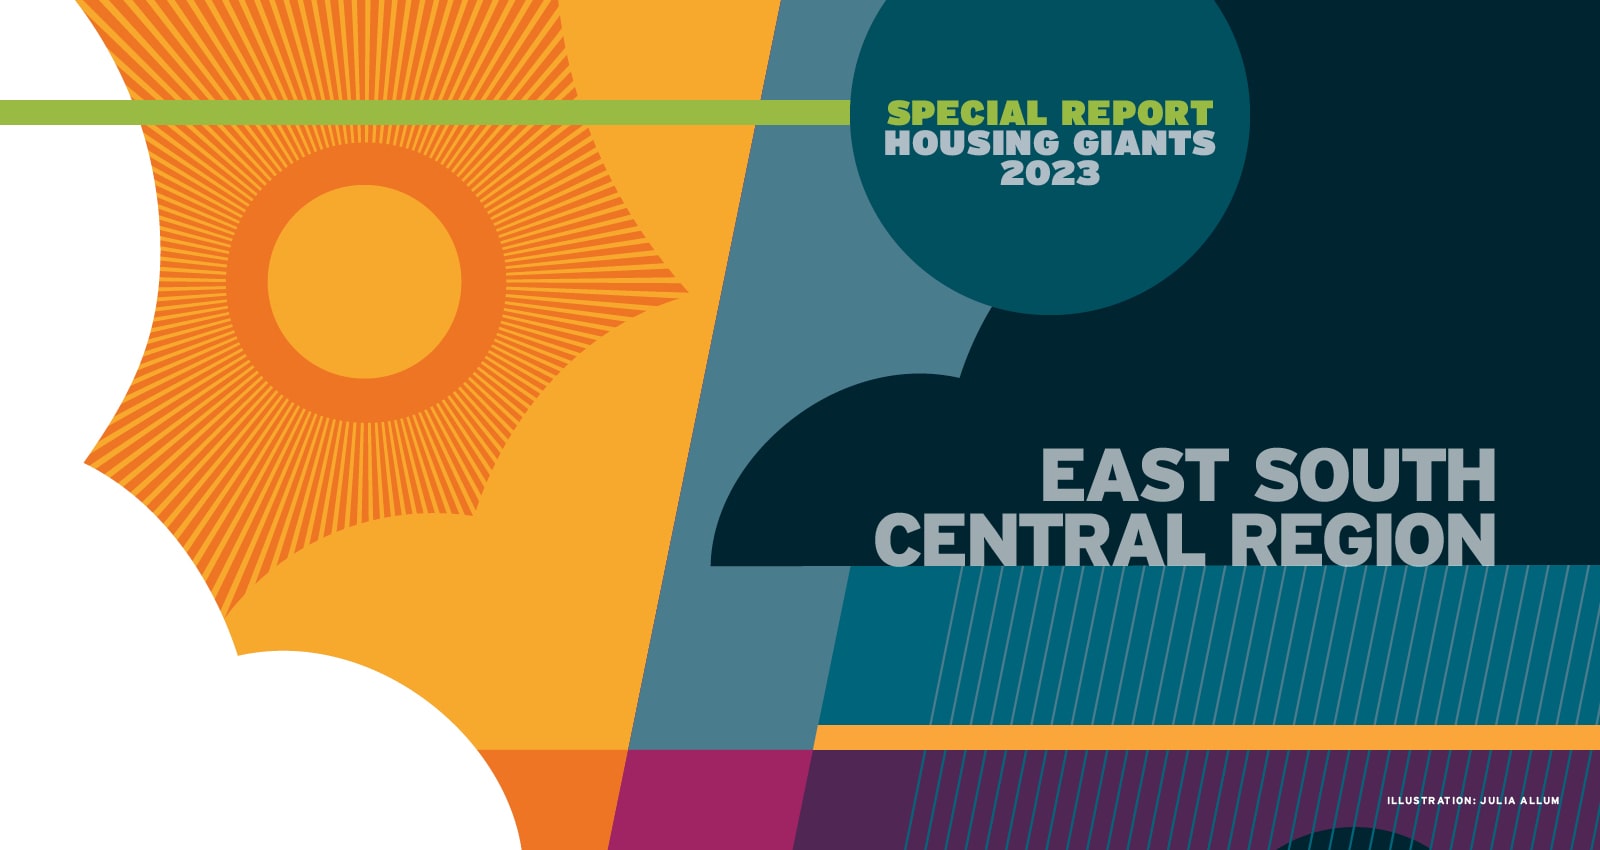 2023 Housing Giants ranked list of top builders in the East South Central region